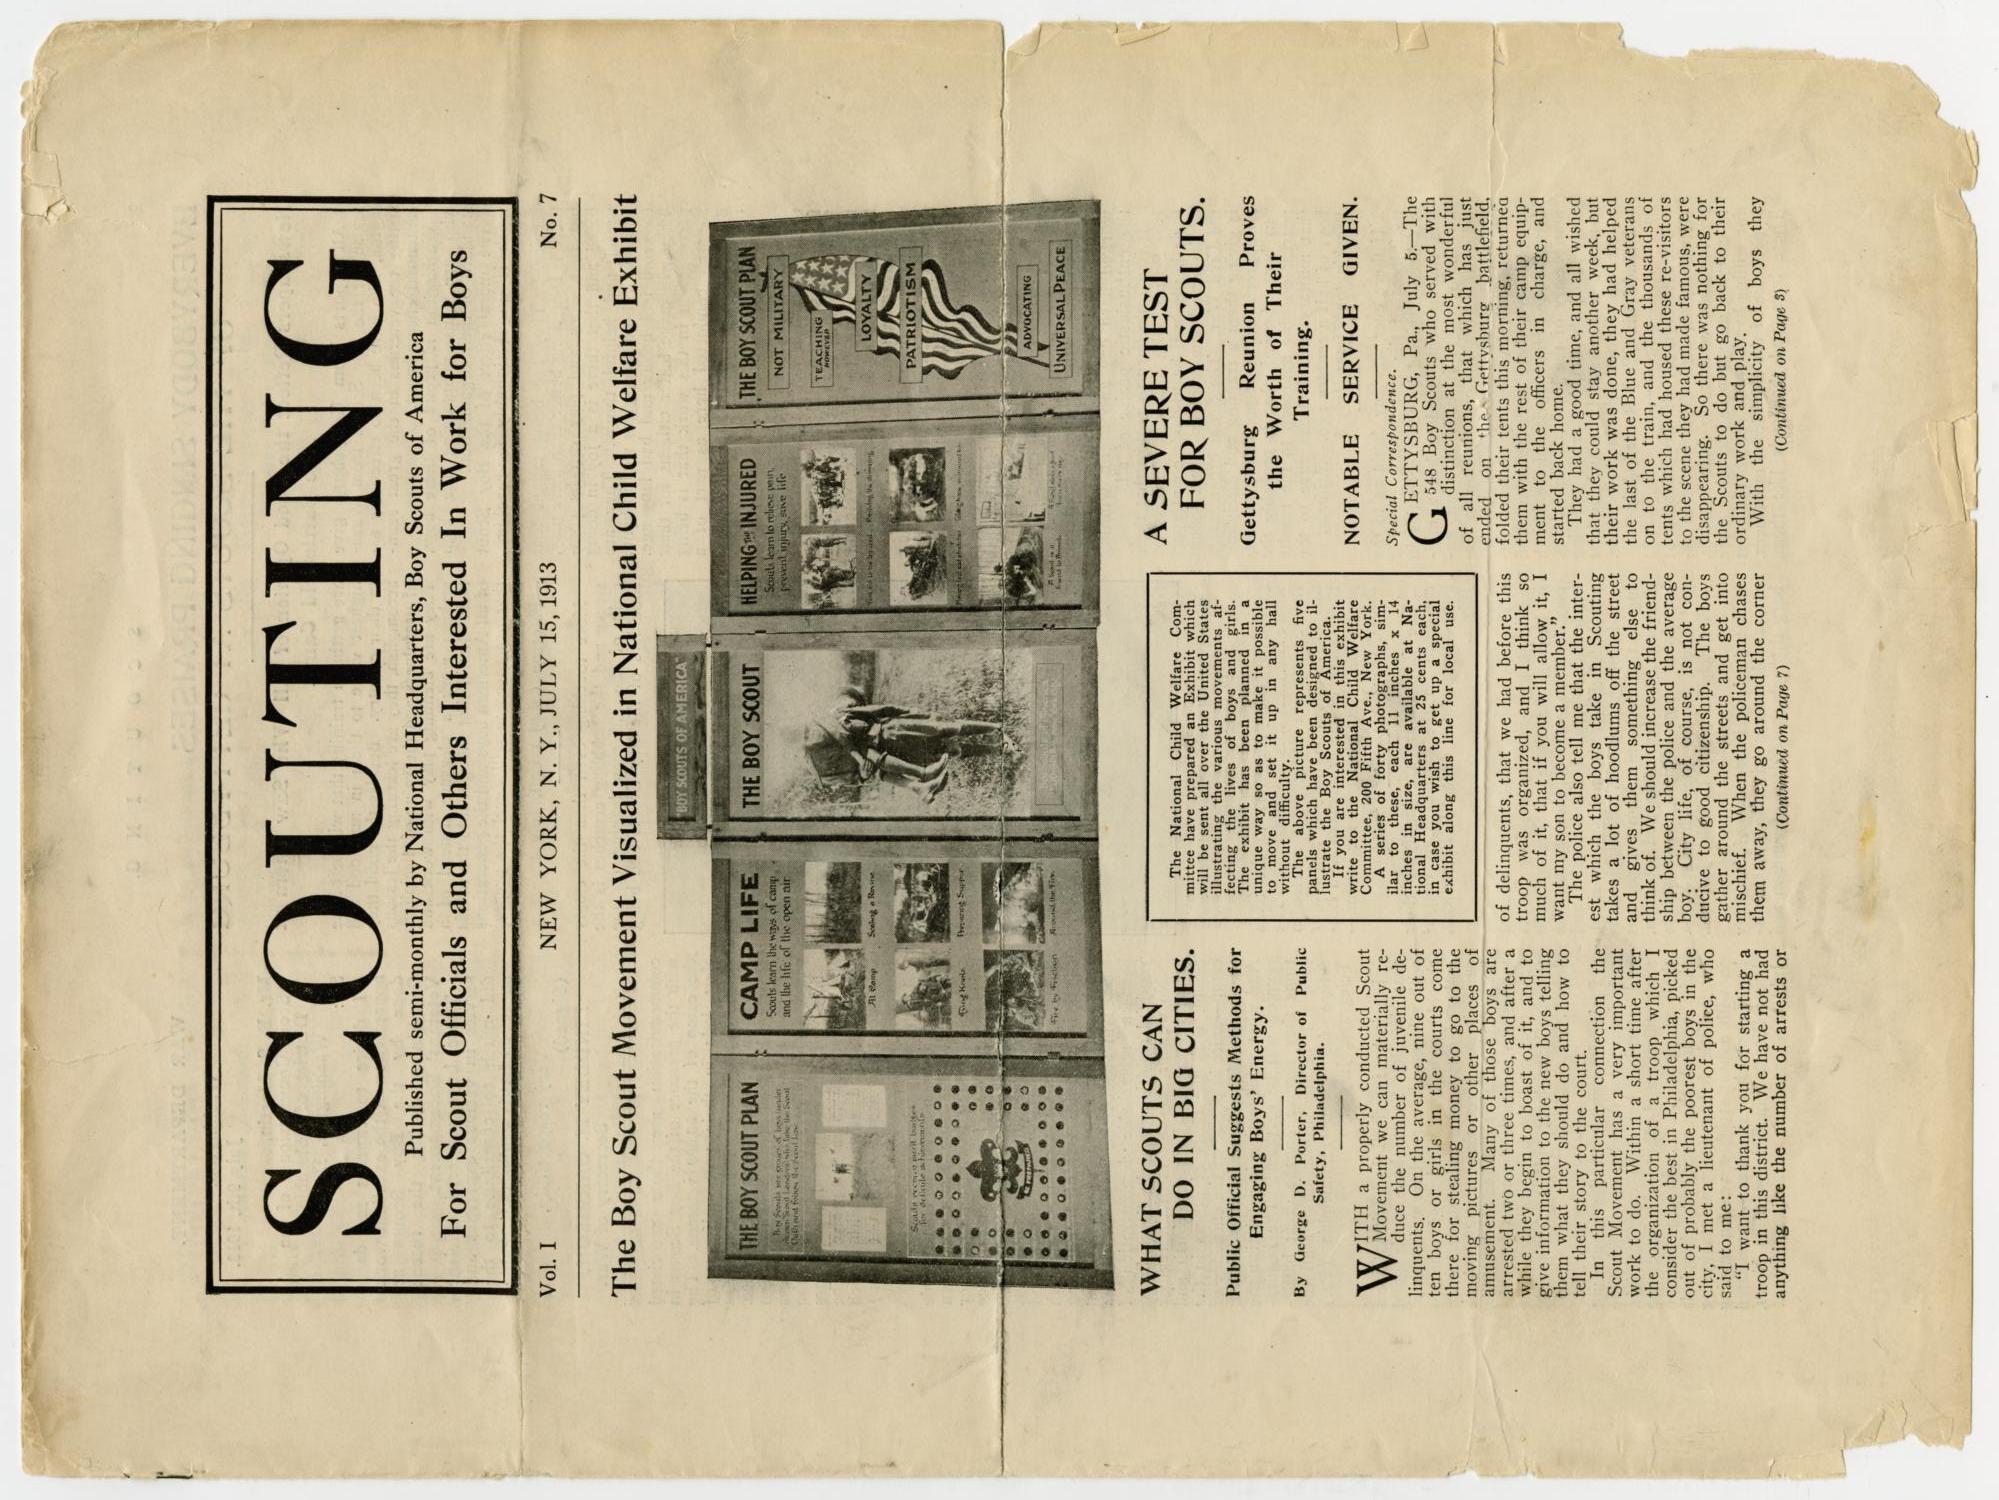 Scouting, Volume 1, Number 7, July 15, 1913
                                                
                                                    1
                                                